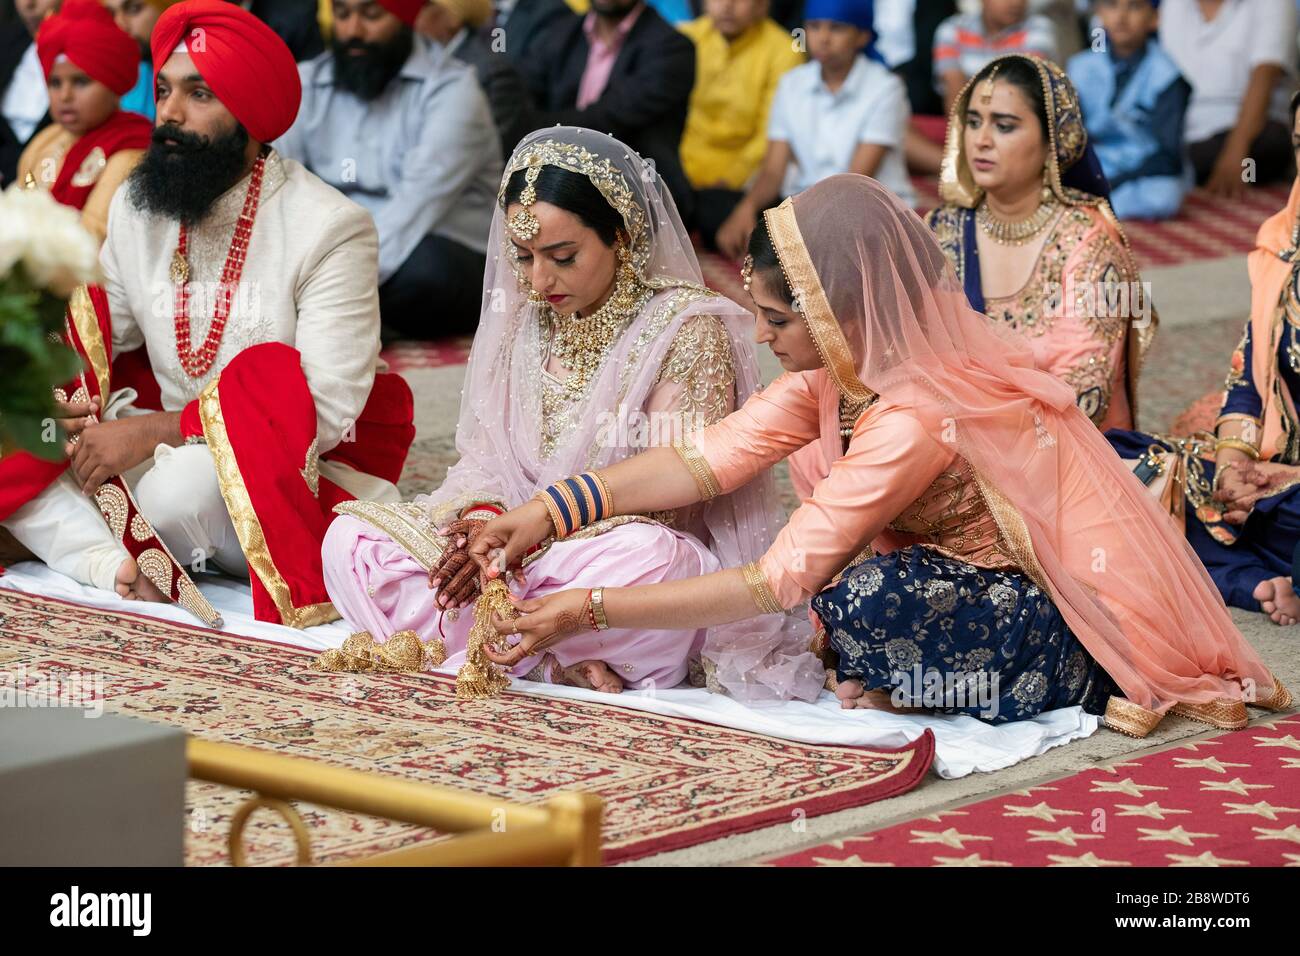 A a Sikh wedding, a bridesmaid adjusts the bride's kalira. In Richmond Hill, Queens, New York City. Stock Photo